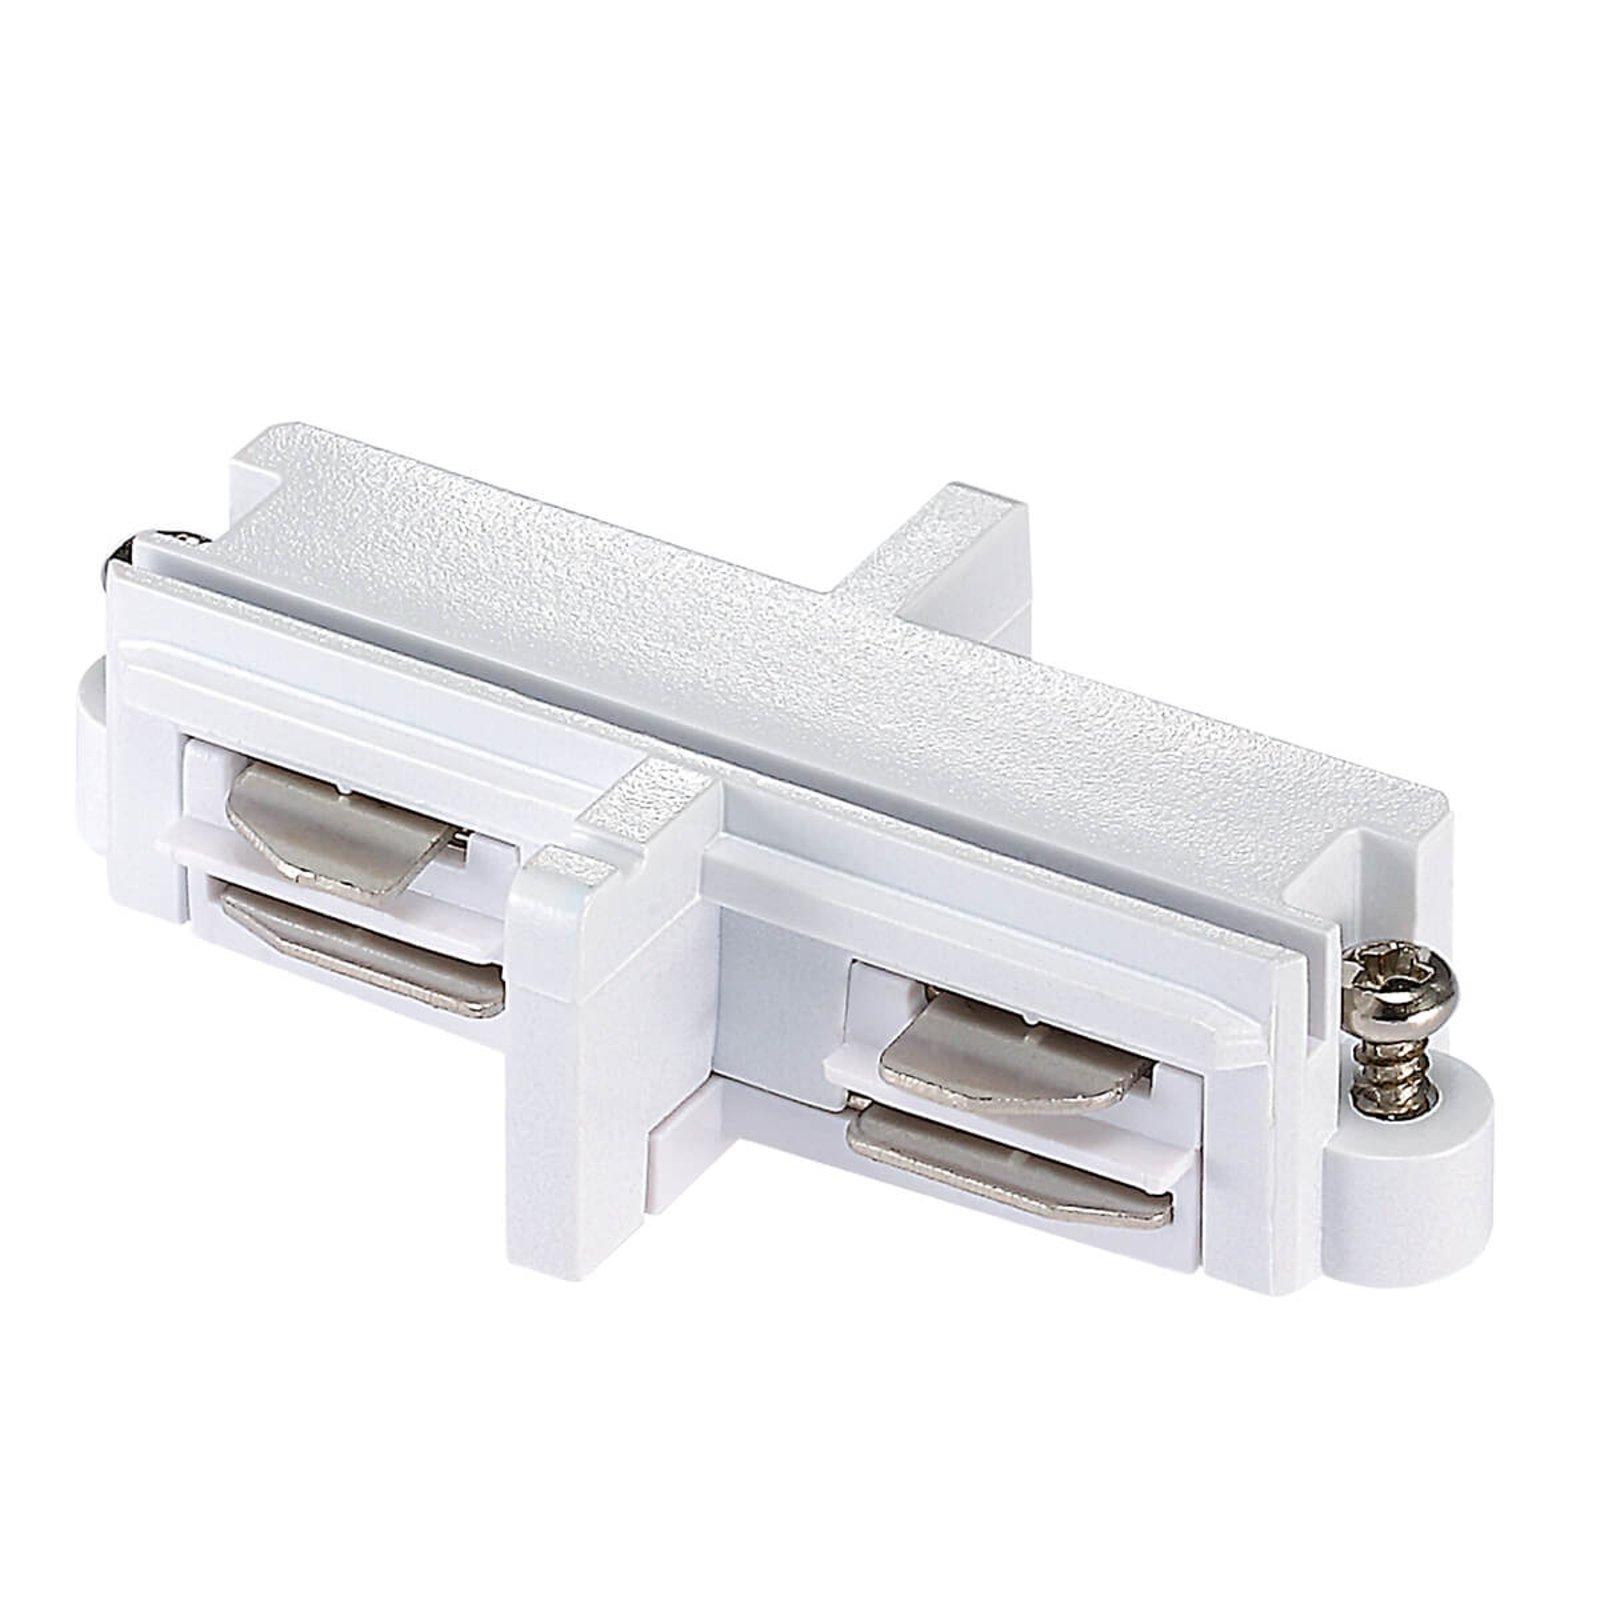 Connector for Link track system, white